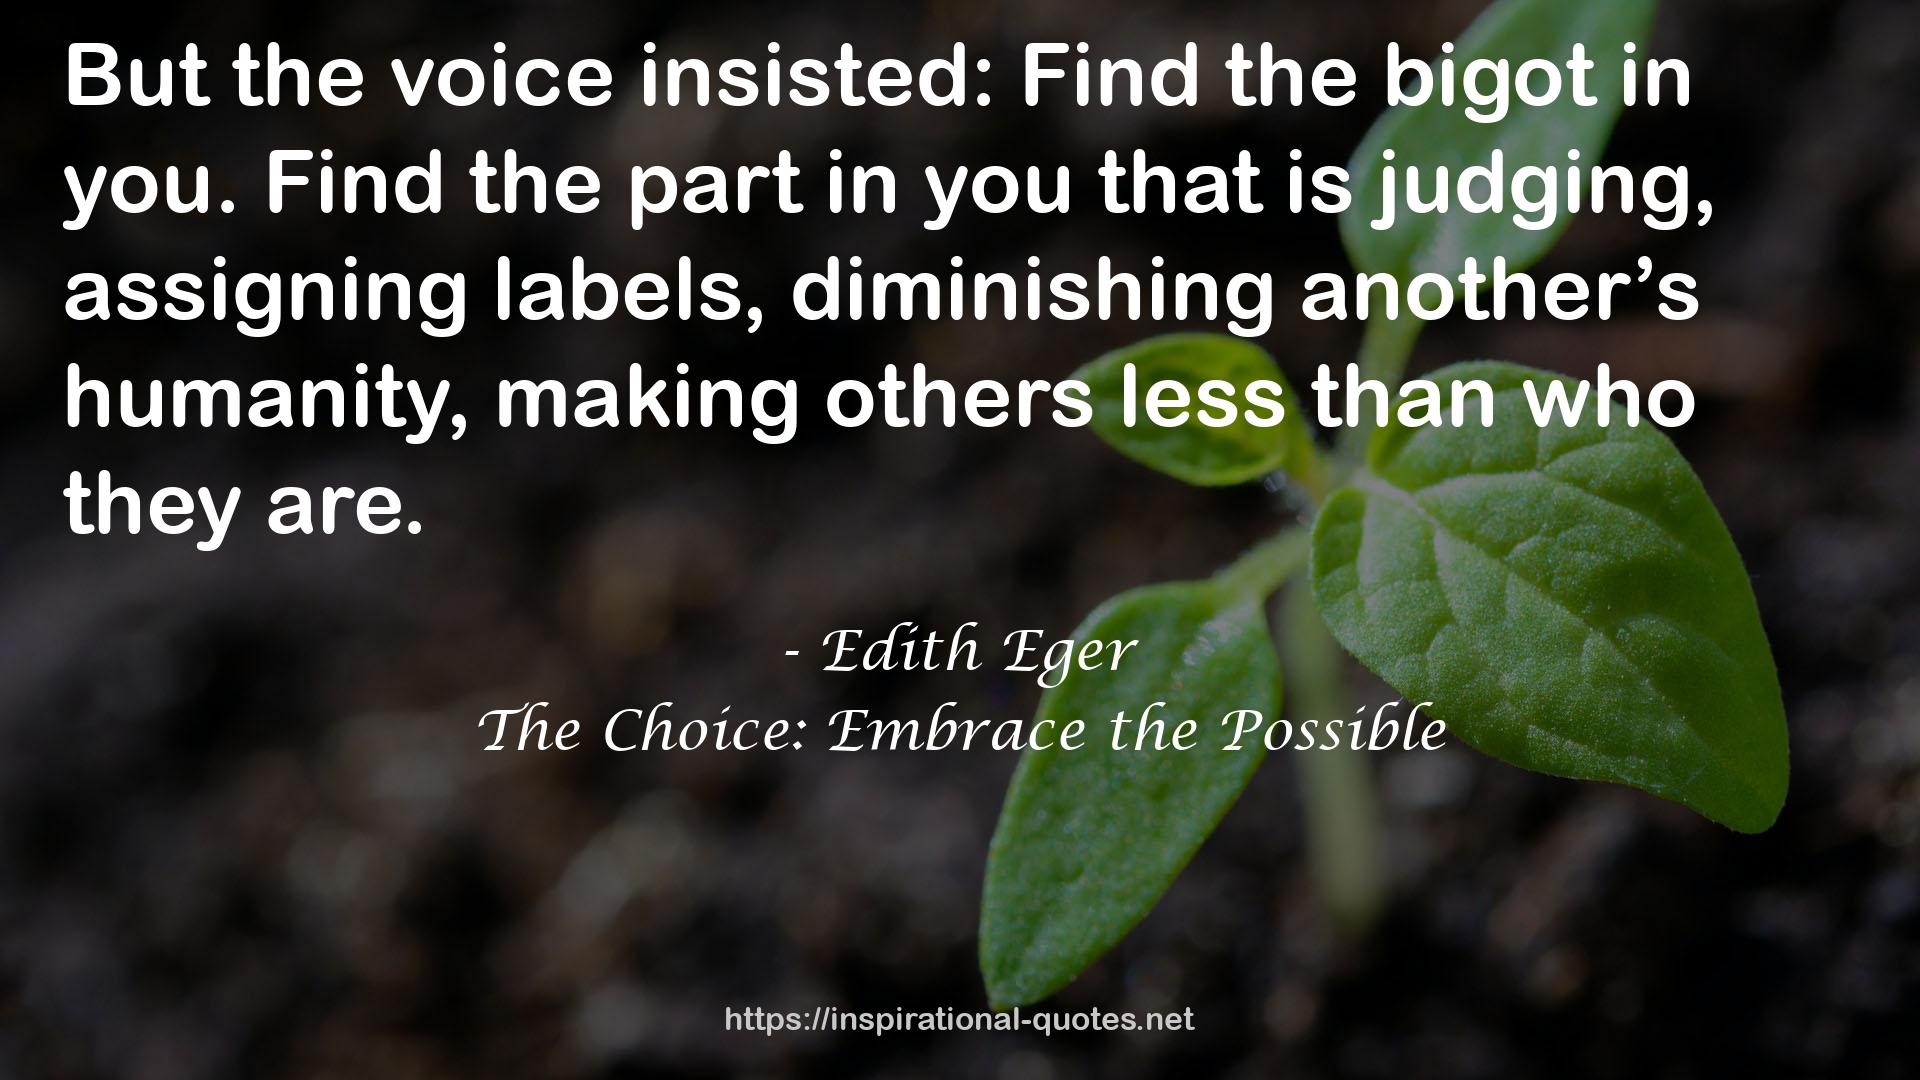 Edith Eger QUOTES